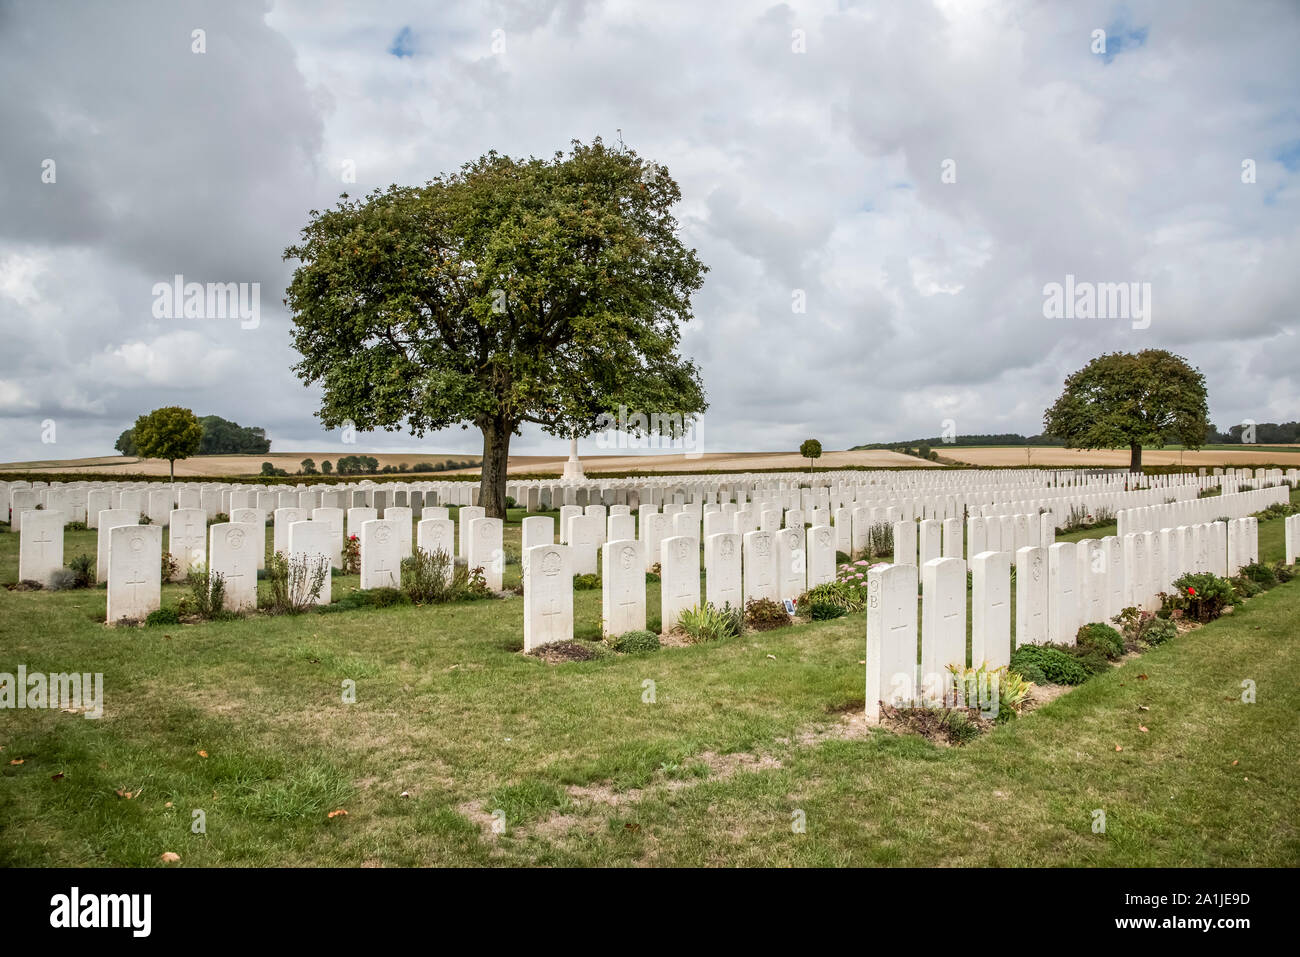 The CWGC WWI Tincourt New British Cemetery near Tincourt-Boucly in the Somme region of norther France Stock Photo